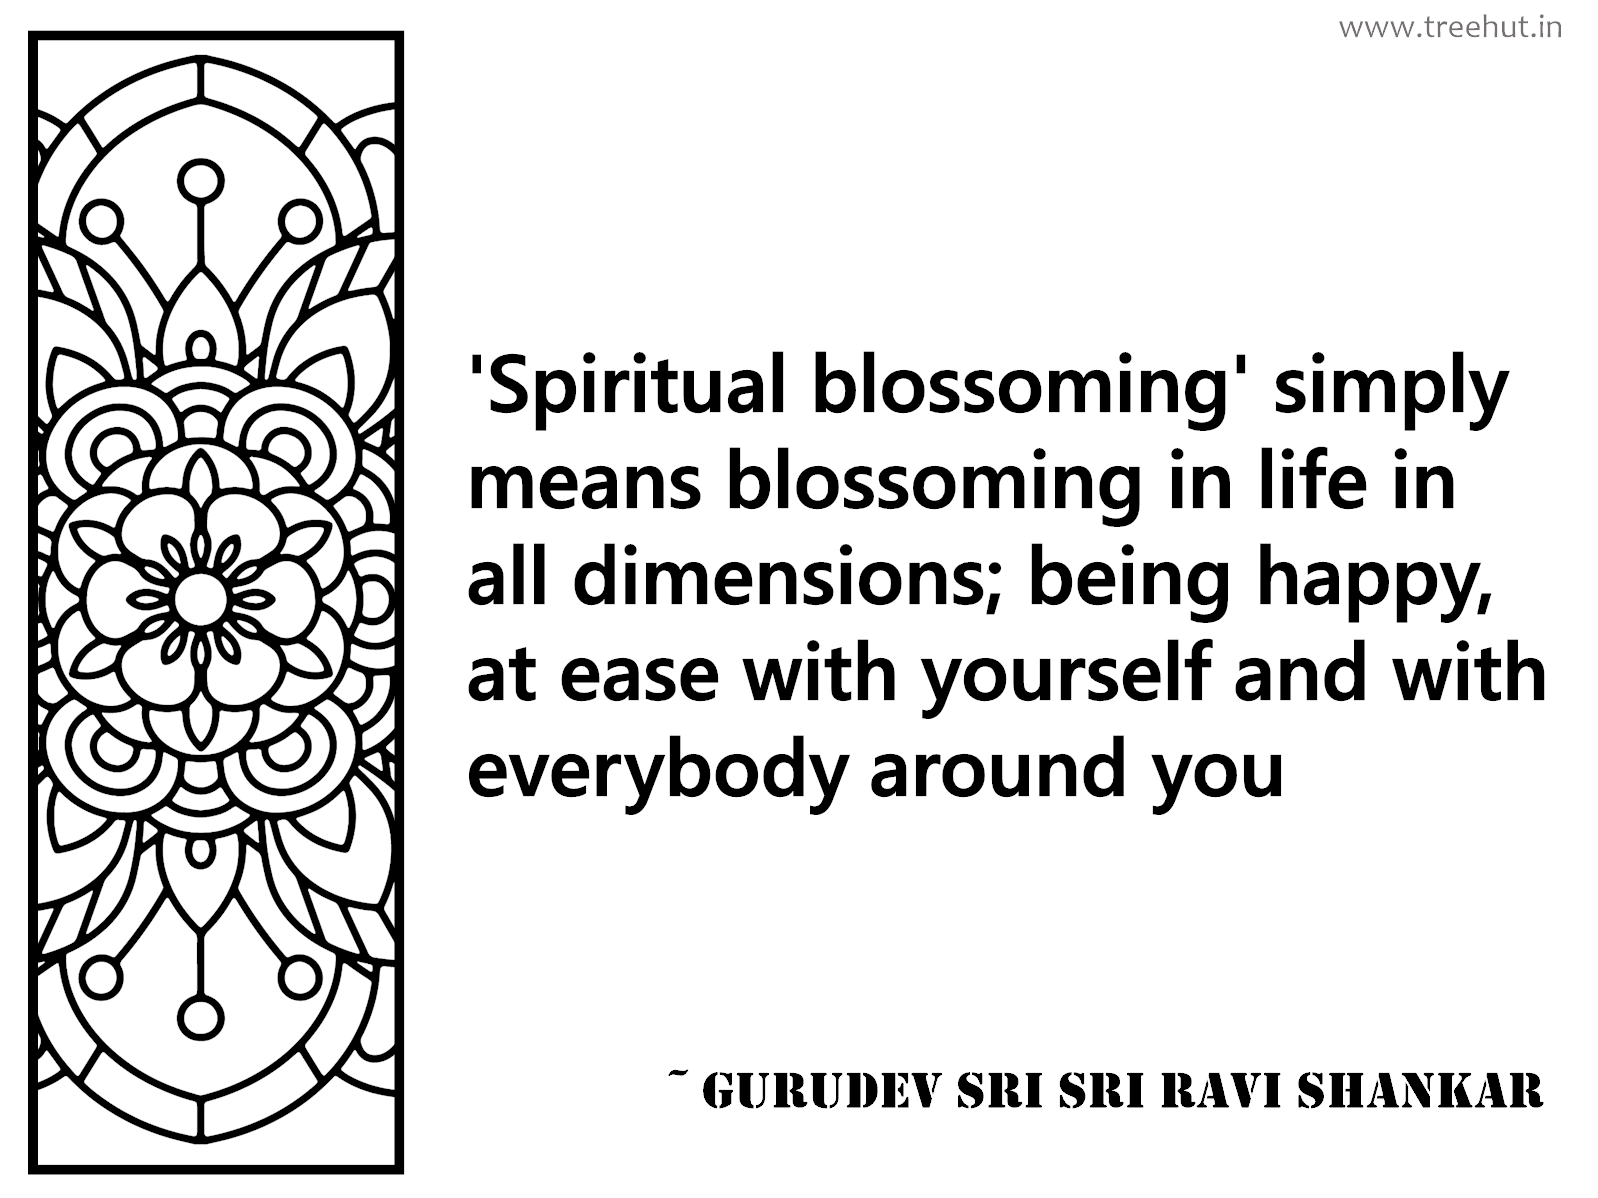 'Spiritual blossoming' simply means blossoming in life in all dimensions; being happy, at ease with yourself and with everybody around you Inspirational Quote by Gurudev Sri Sri Ravi Shankar, coloring pages